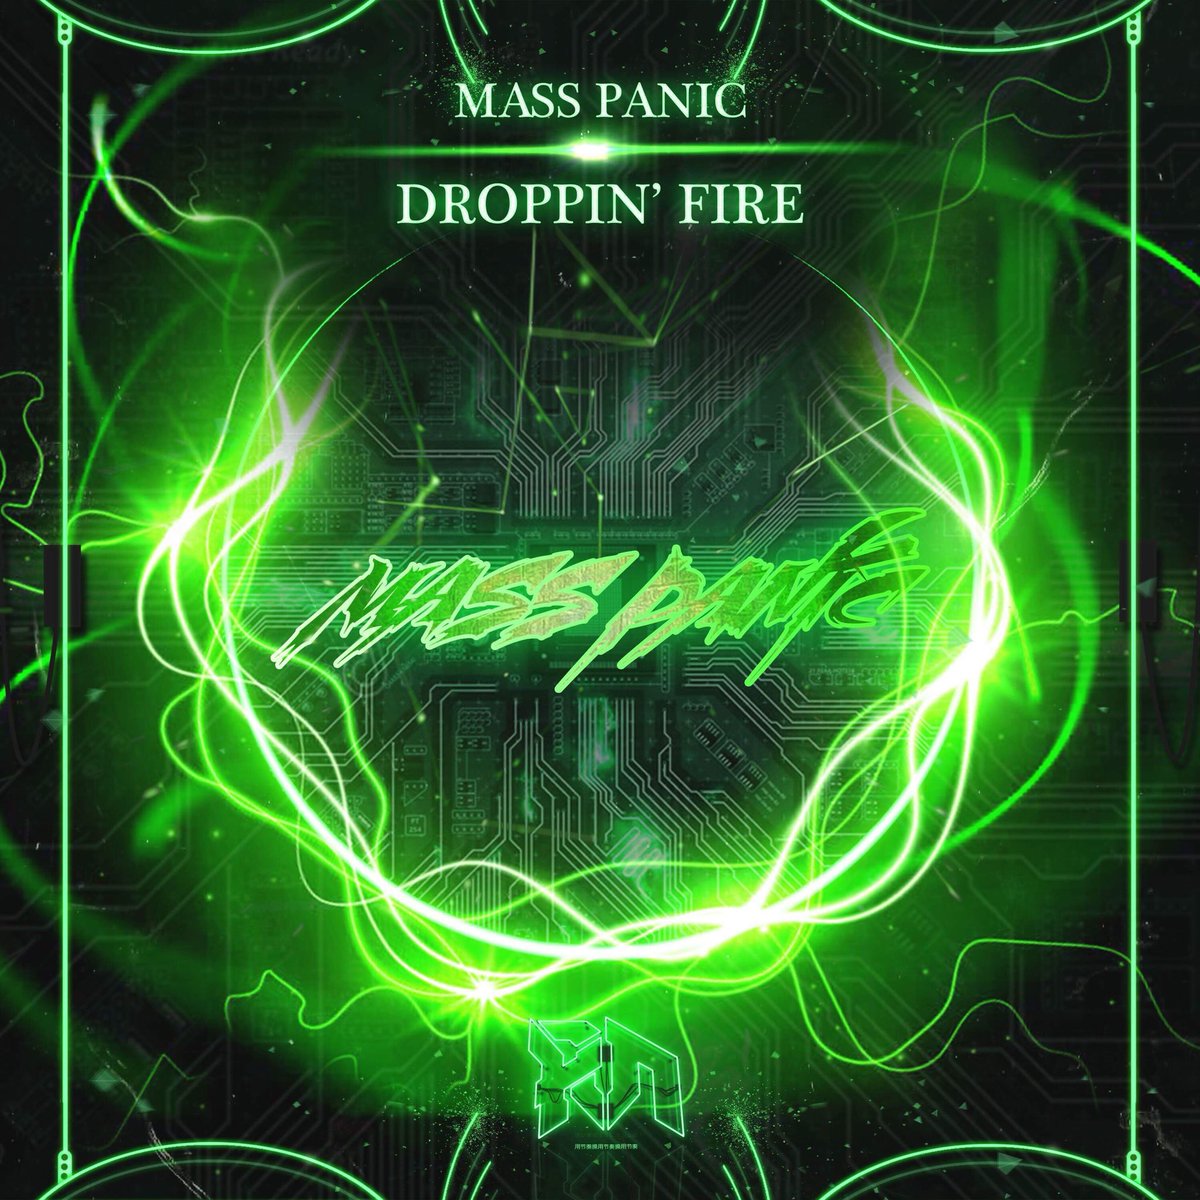 stoked to announce ‘DROPPIN’ FIRE’ is coming out on @riddimnetwork - details soon 🤘🏼🔥